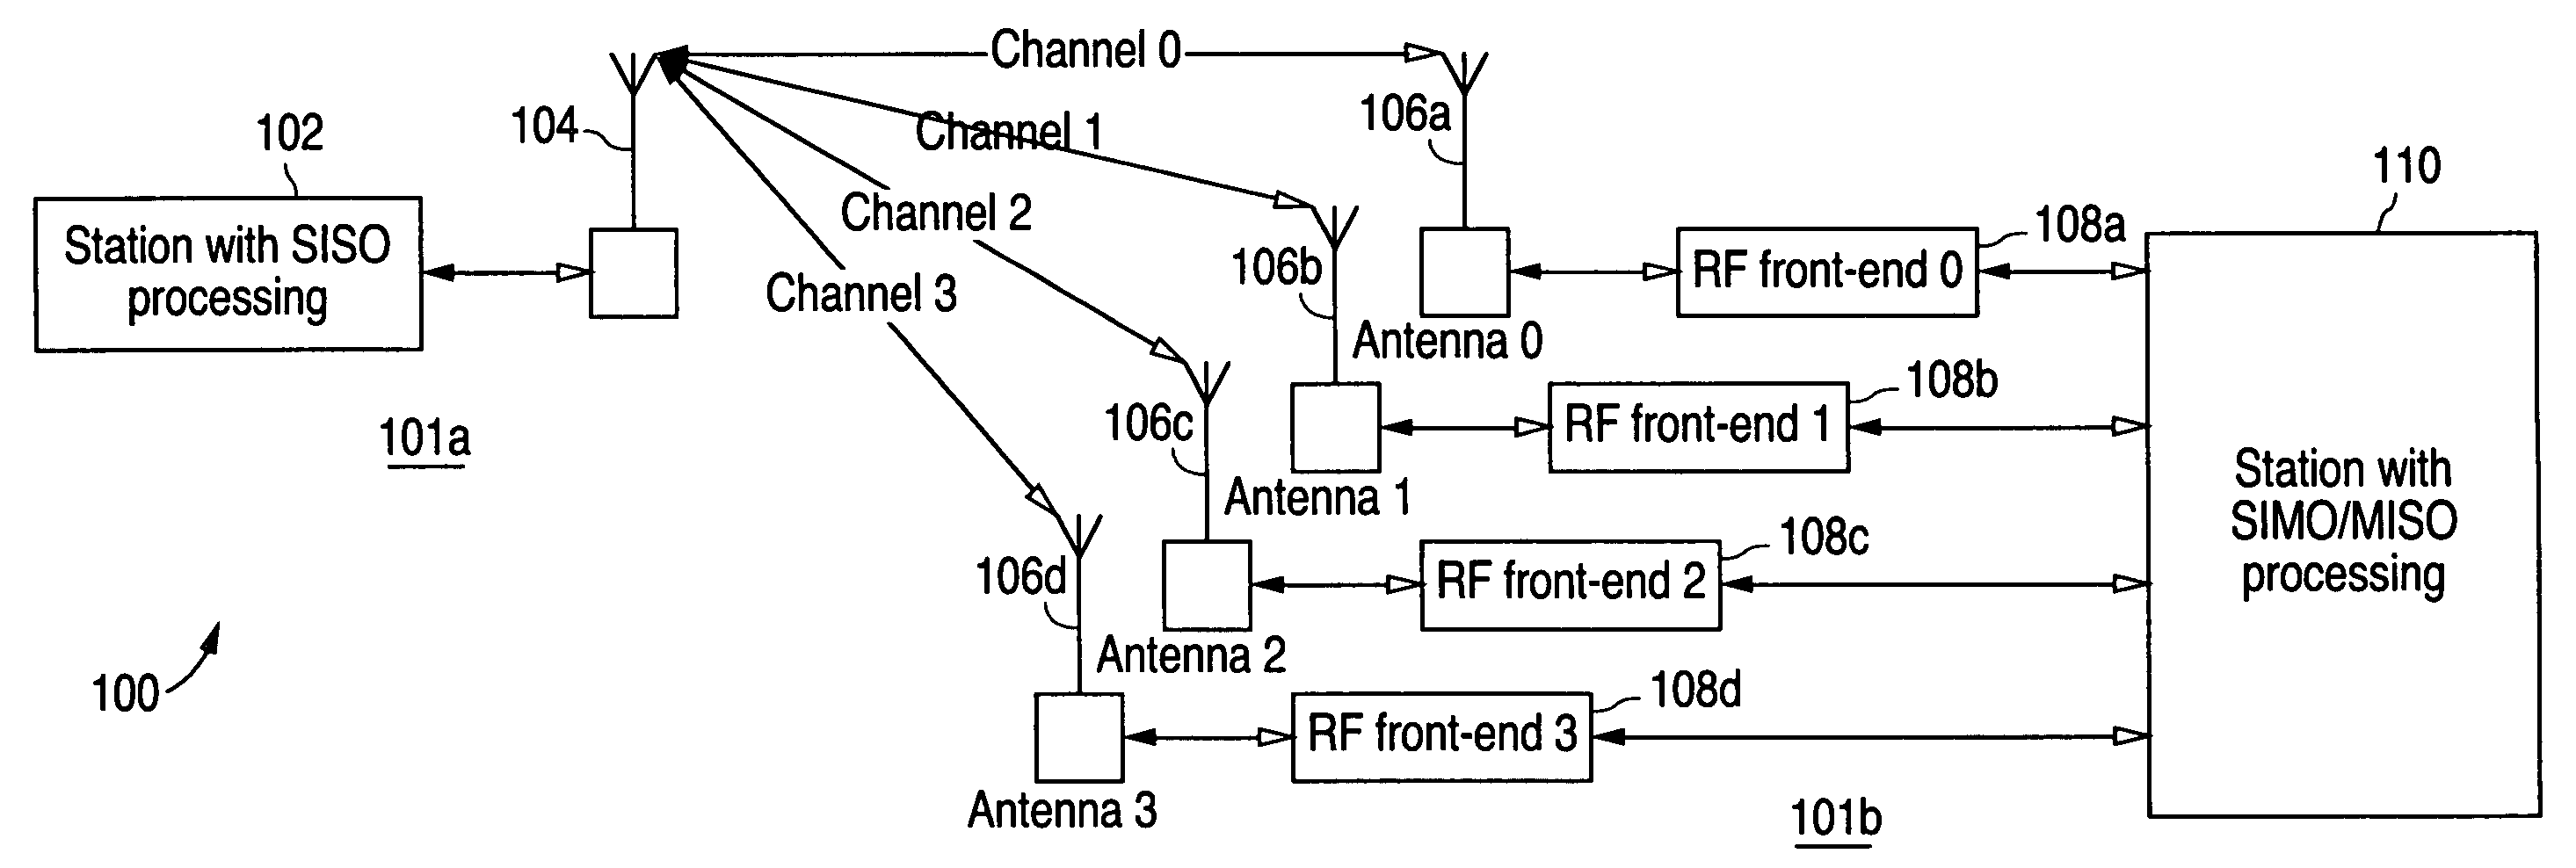 Apparatus for generating signal gain coefficients for a SIMO/MISO transceiver for providing packet data communication with a SISO transceiver